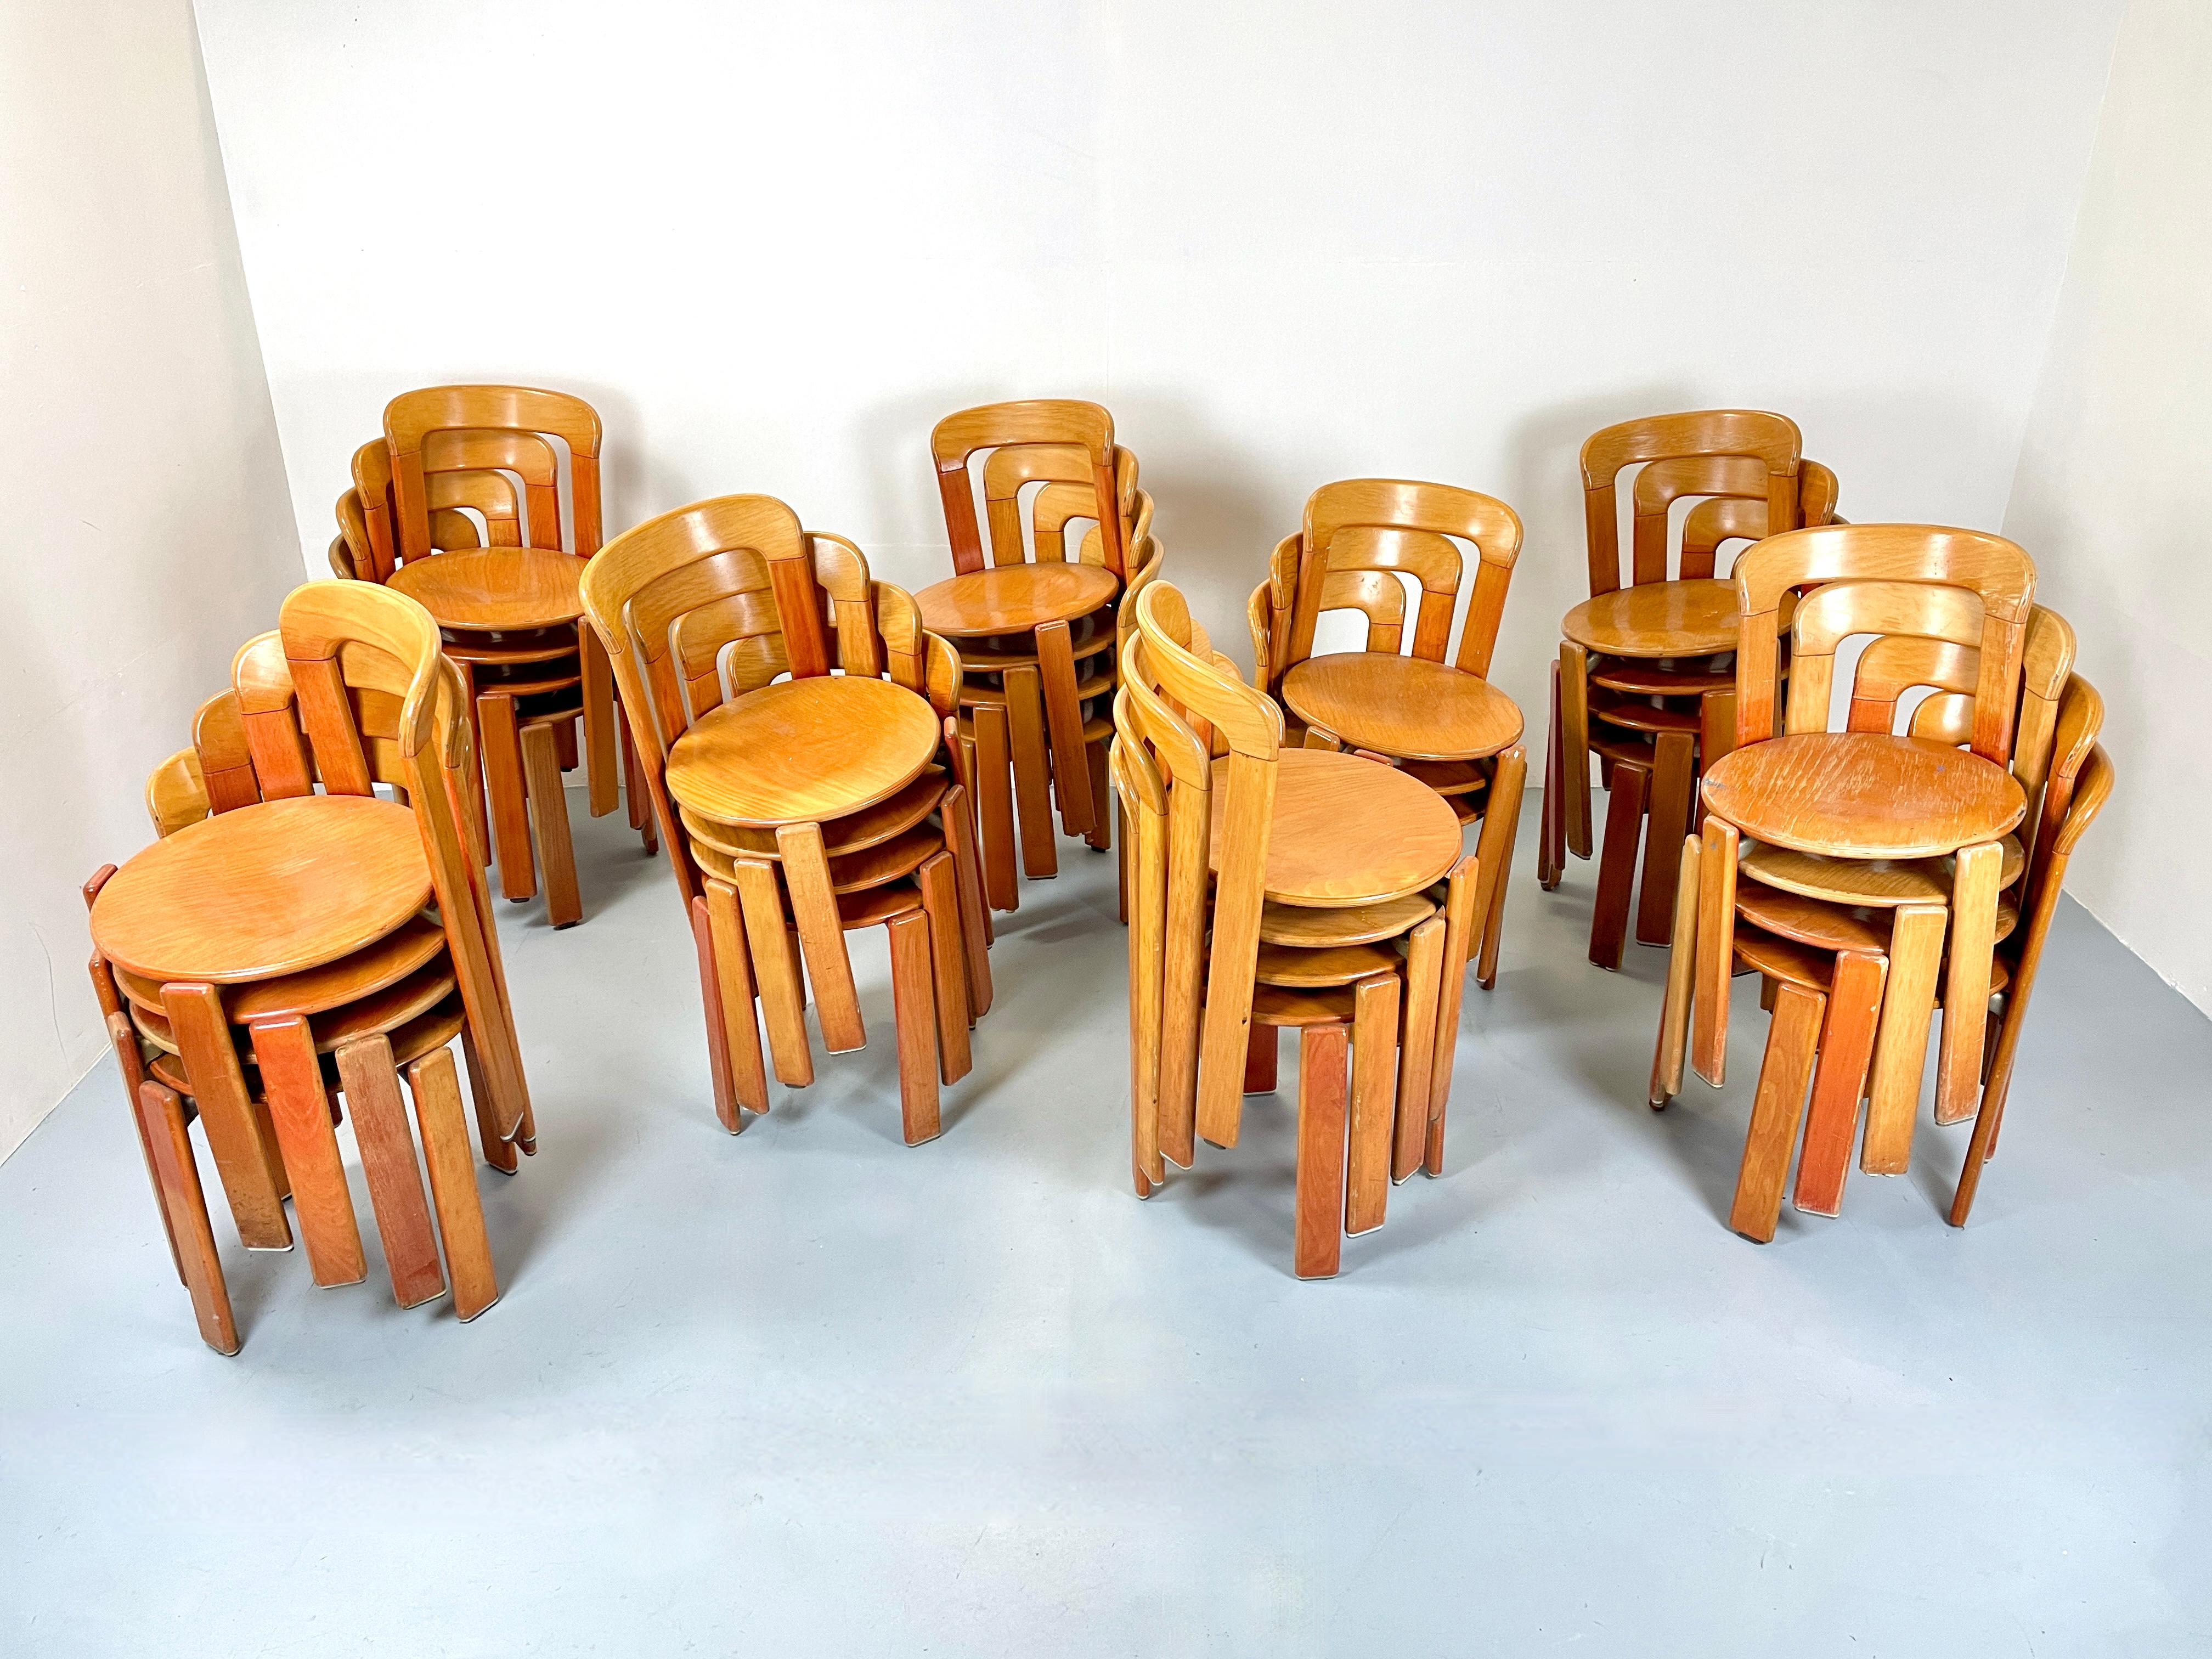 Beautiful vintage stacking chairs by Bruno Rey for Dietiker. The chairs are in a nice and warm beechwood. Probably from the 1980s, made in Switzerland.

Solid and very sturdy construction with Dietiker’s unqiue screwless wood-to-metal design.